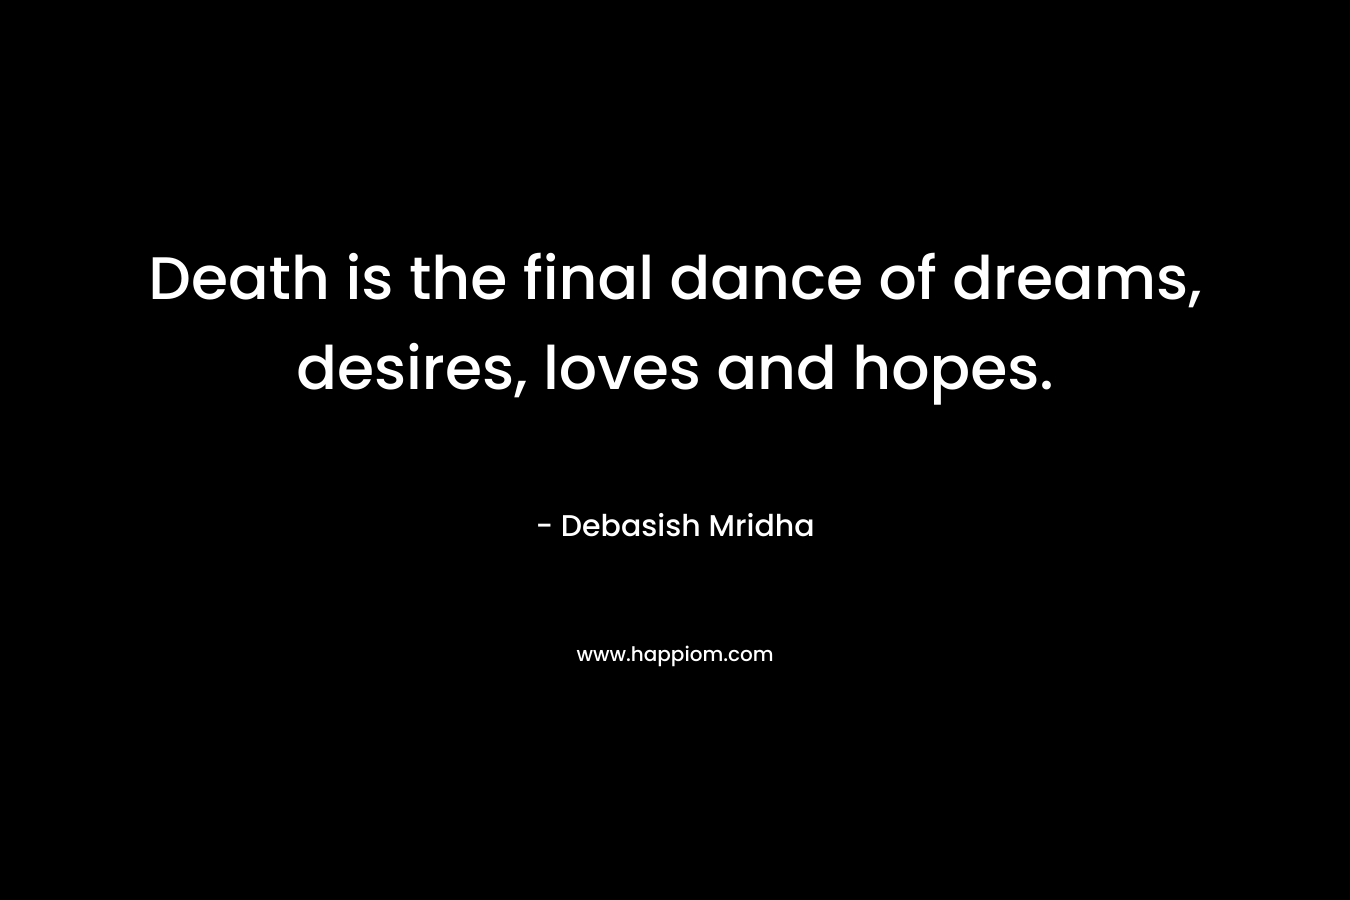 Death is the final dance of dreams, desires, loves and hopes. – Debasish Mridha